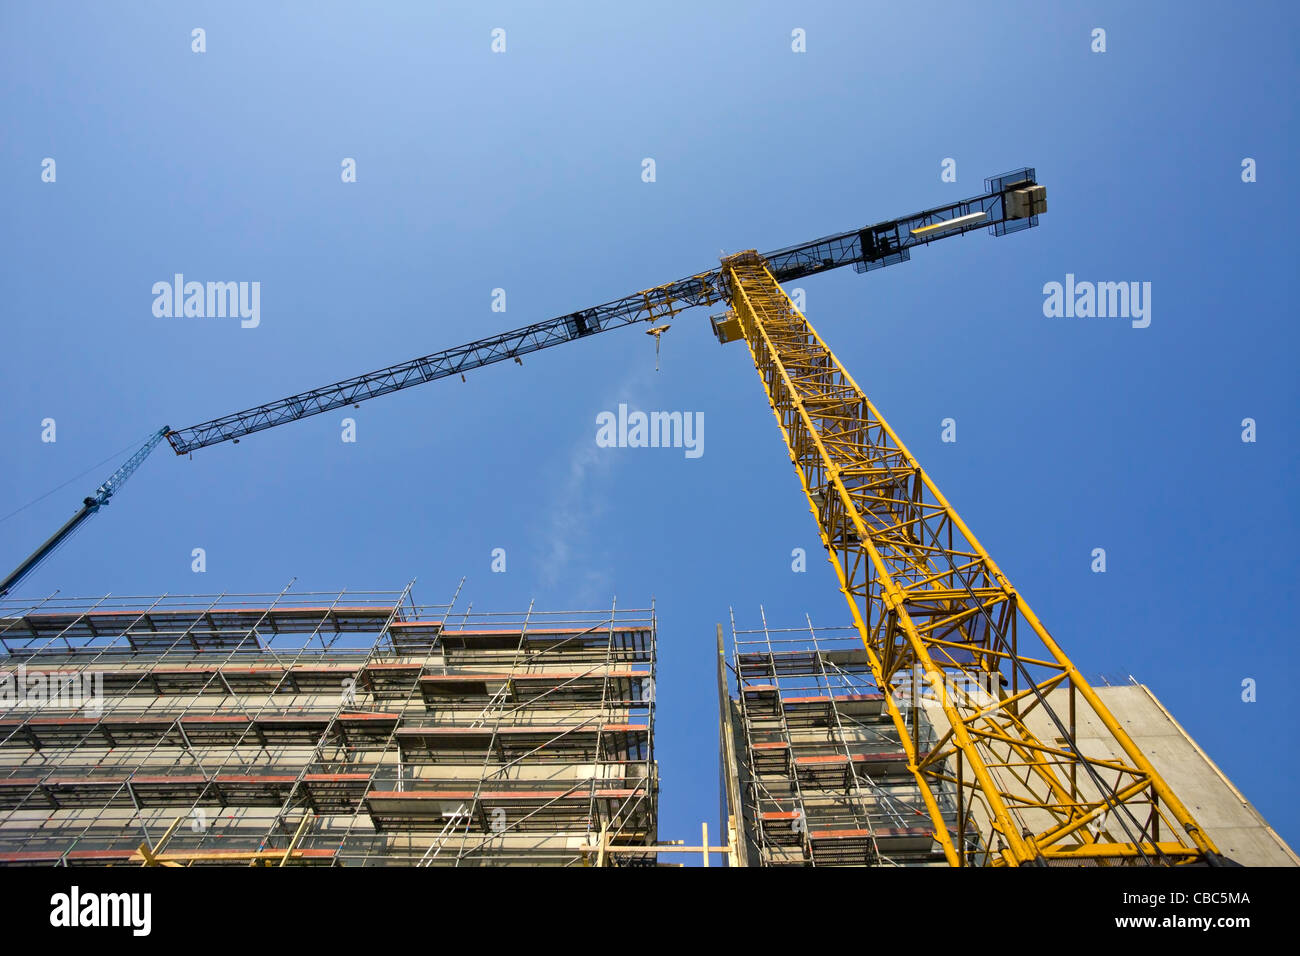 Construction Site Oulu Finland Stock Photo, Royalty Free Image ...